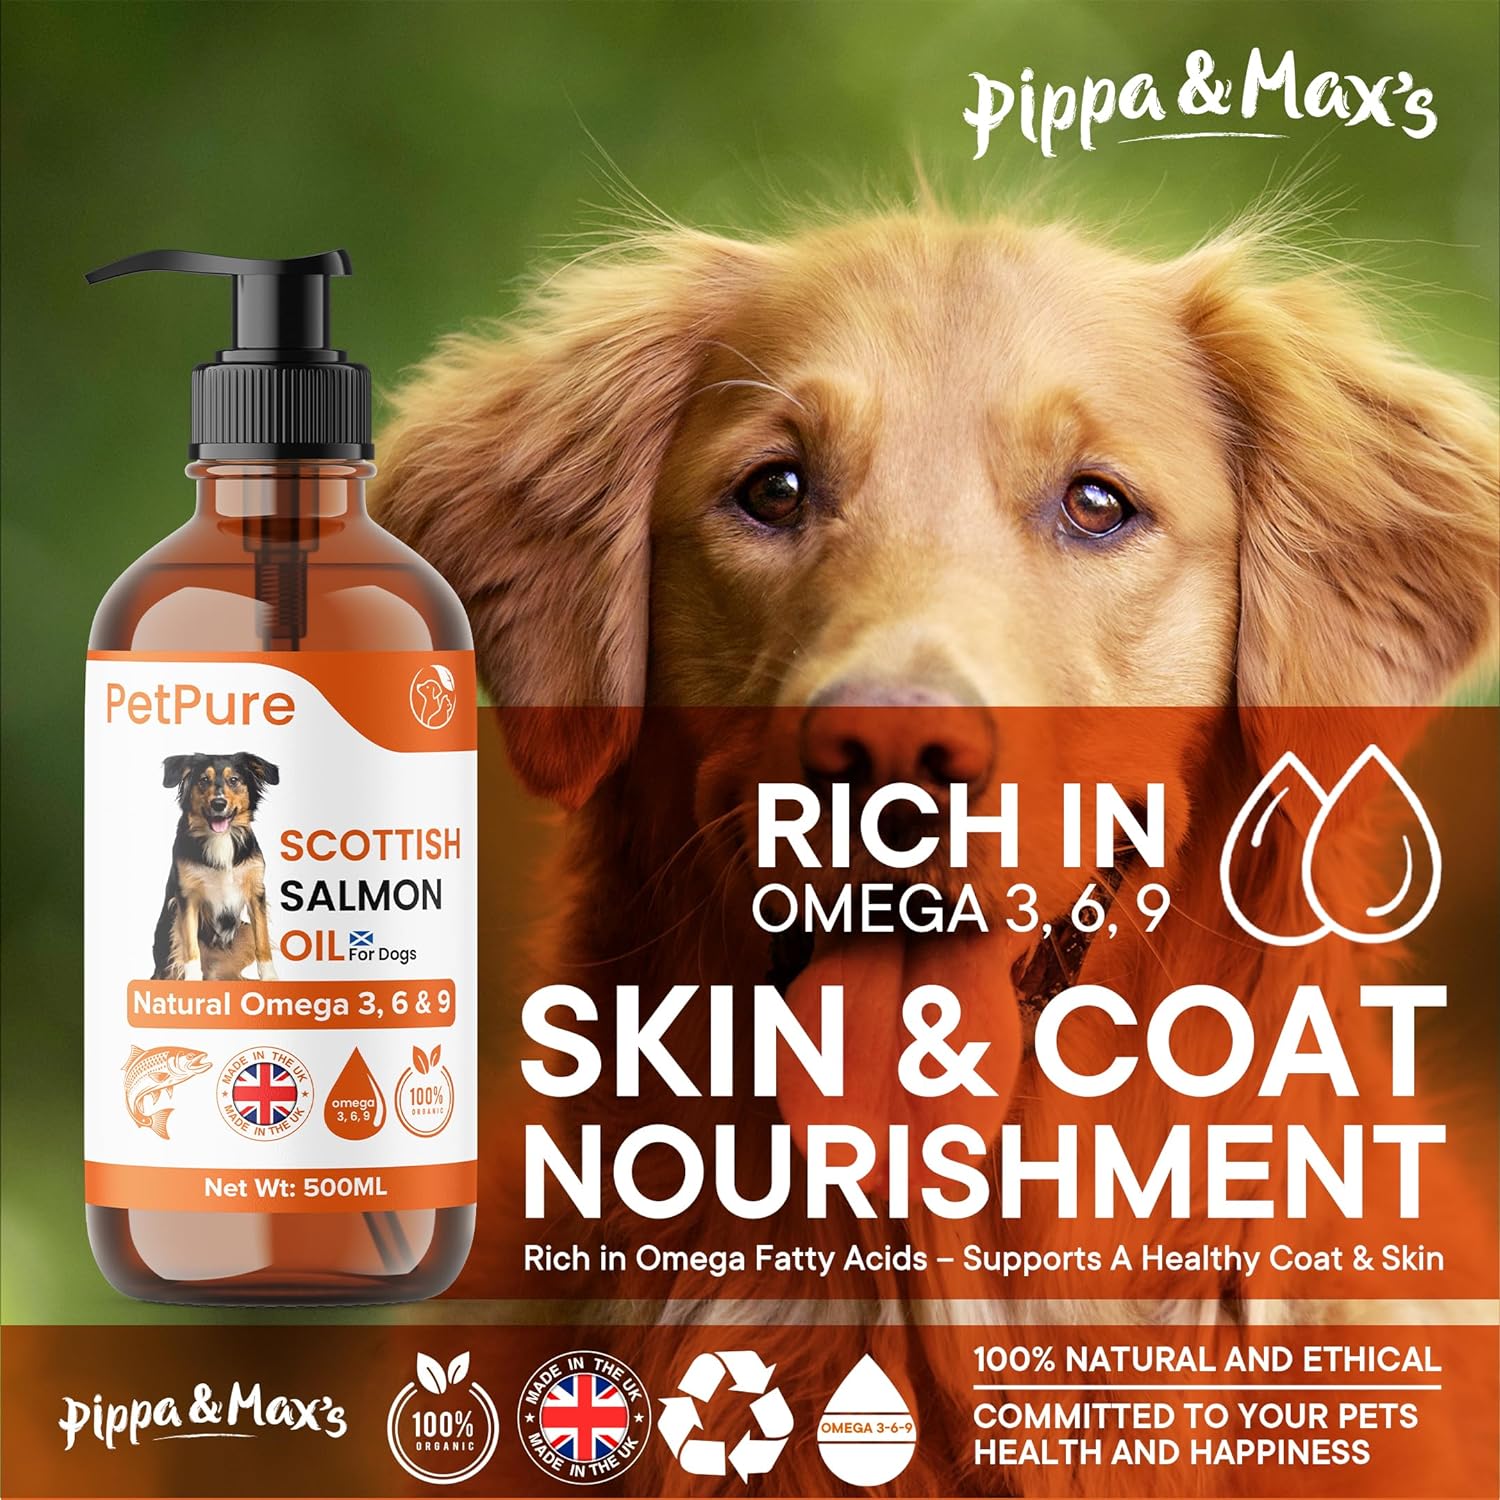 Pippa & Max Scottish Salmon Oil for Dogs & Pets (500ml) - Pure Omega 3, 6 & 9 Fish Oil Liquid Supplement for Natural Coat, Immune Support, Skin Comfort, and Overall Health